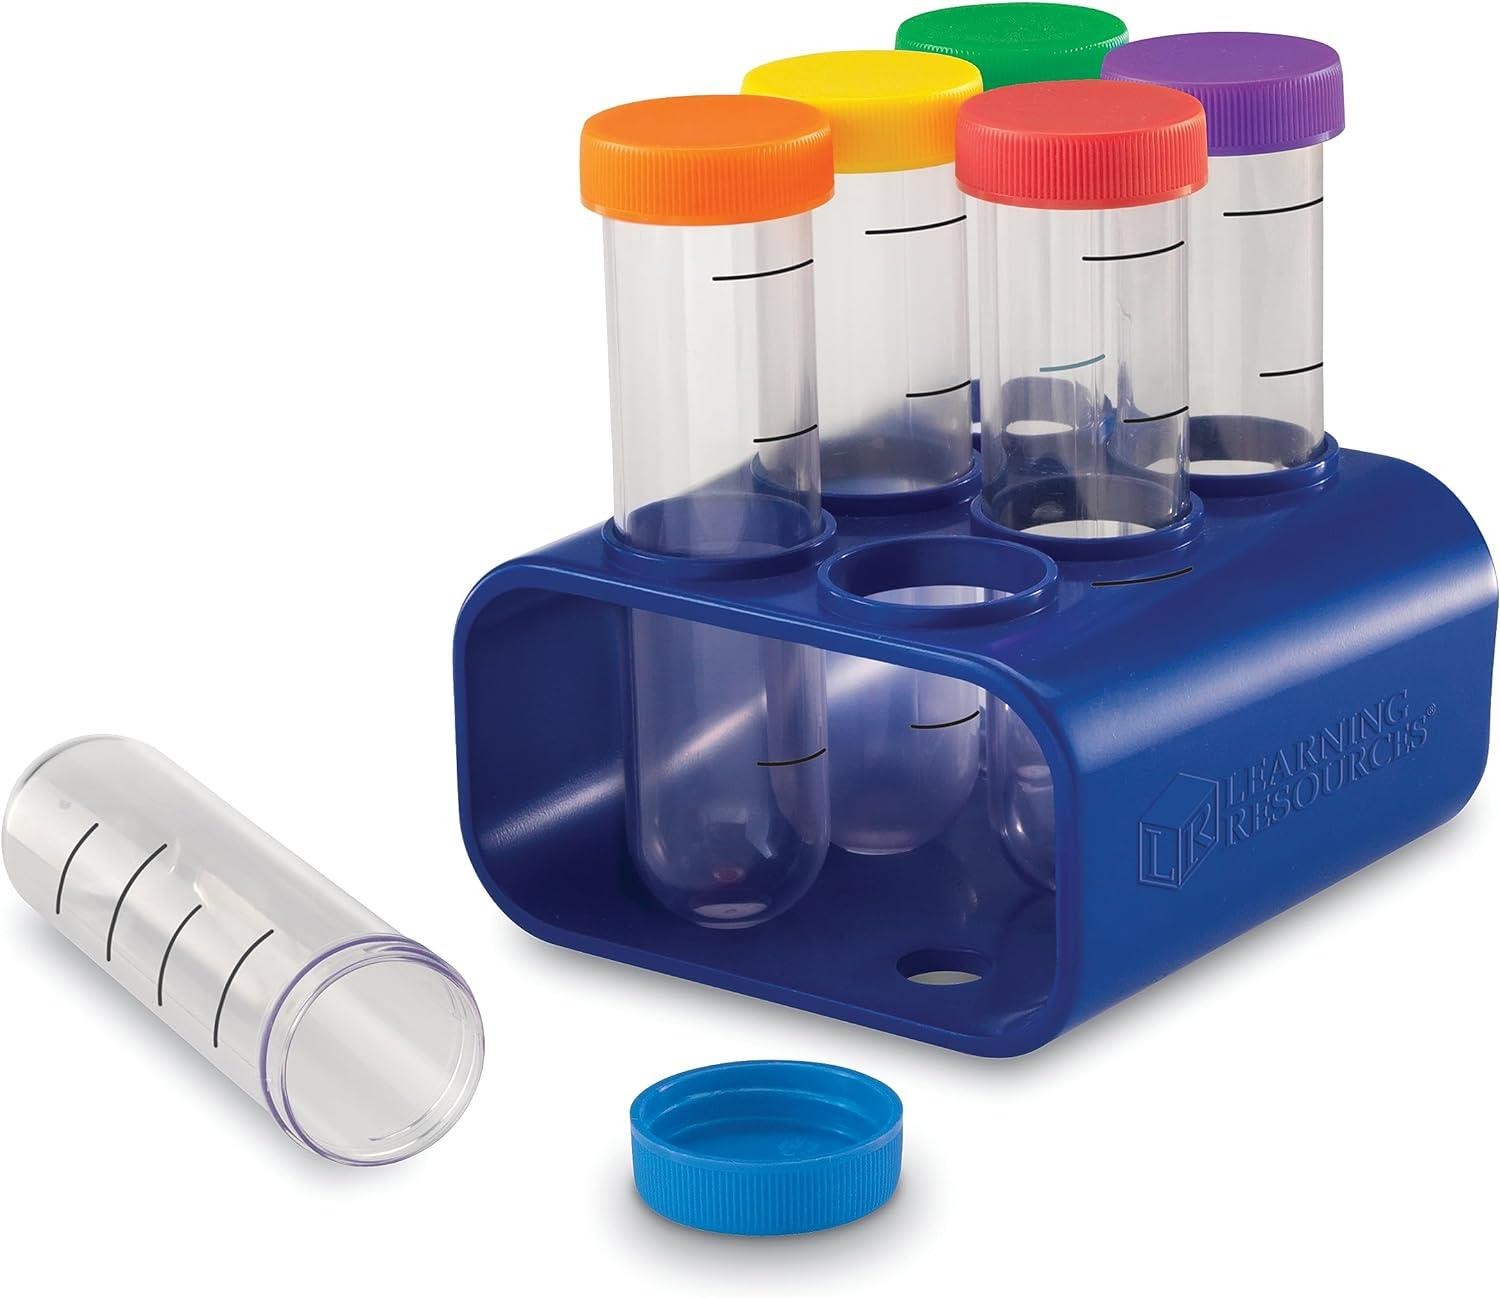 Primary Science® Jumbo Test Tubes with Stand